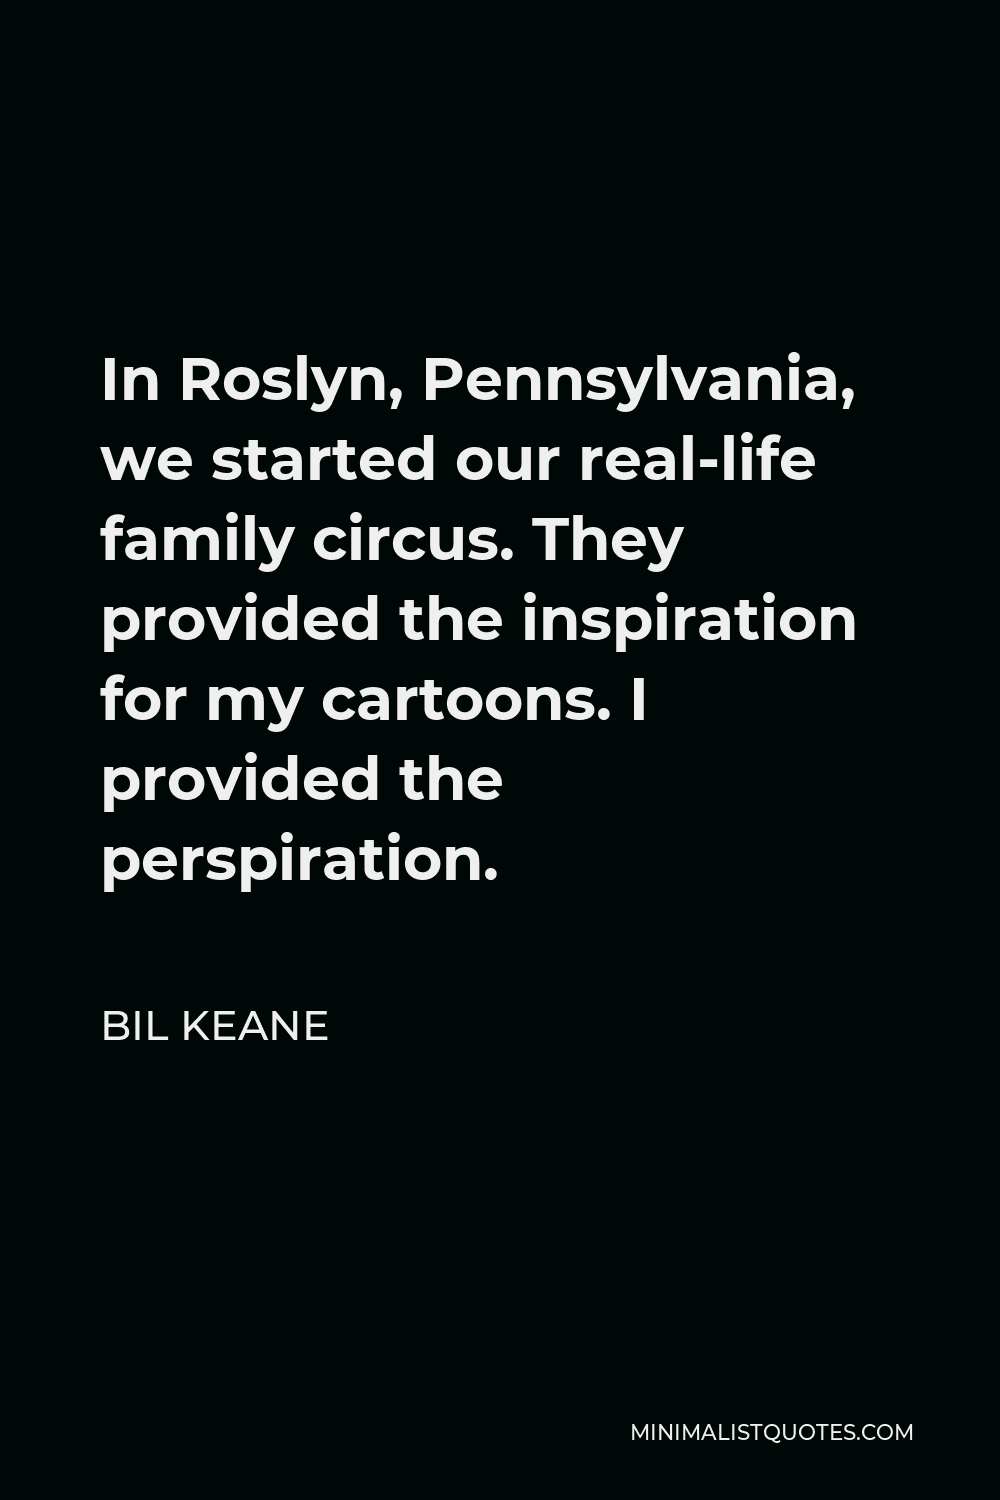 Bil Keane Quote - In Roslyn, Pennsylvania, we started our real-life family circus. They provided the inspiration for my cartoons. I provided the perspiration.